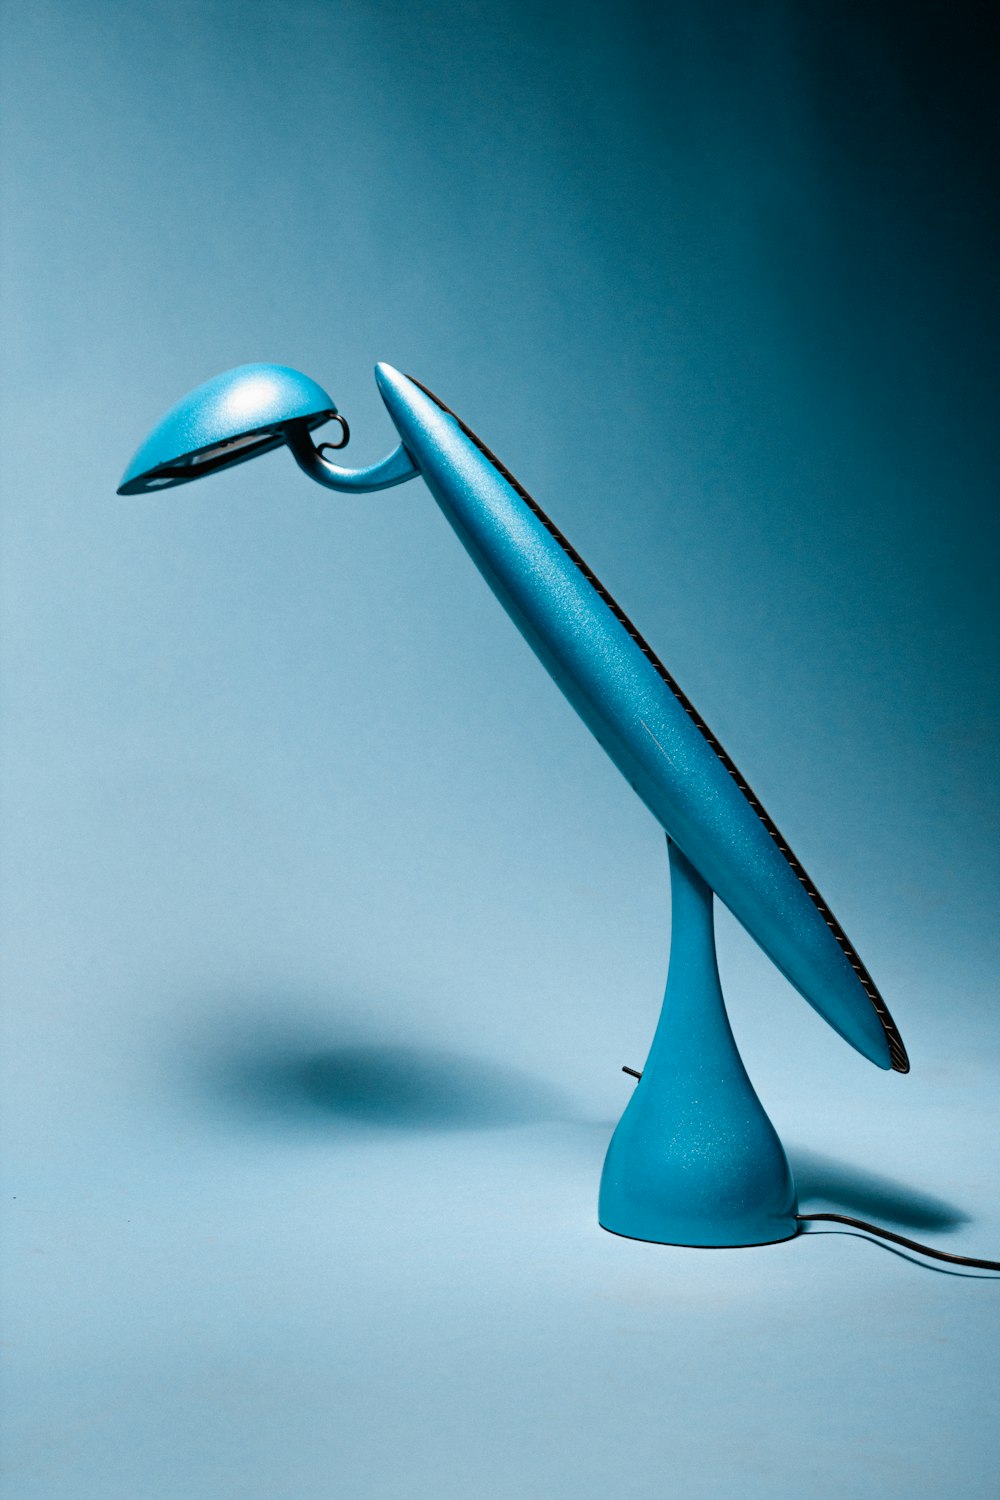 a blue object with a curved handle on a blue background